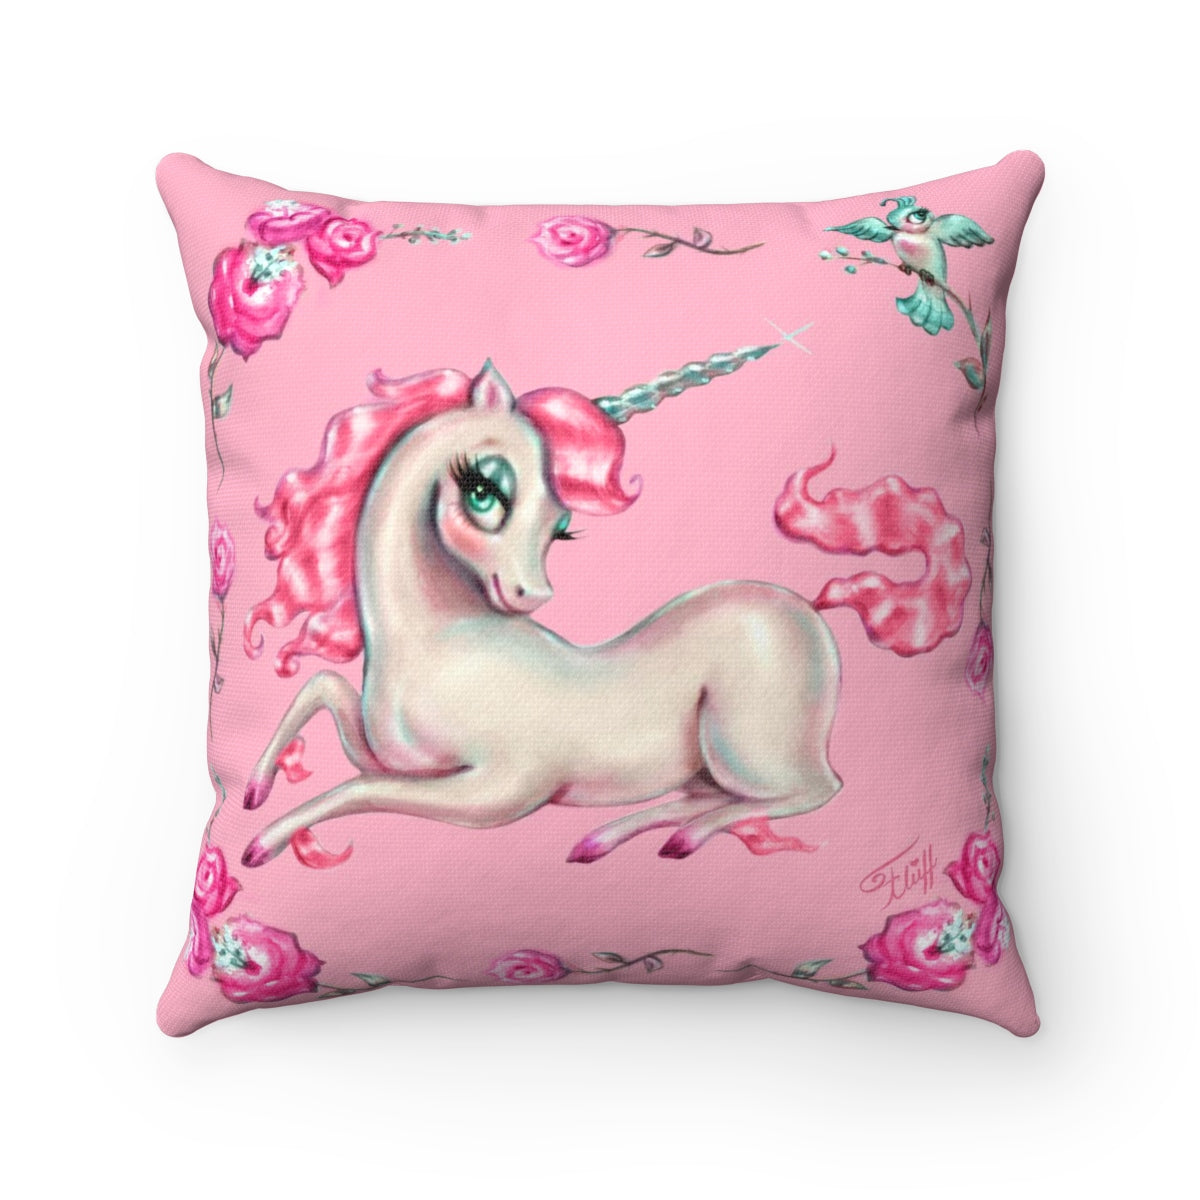 Unicorns and Roses on Pink • Square Pillow